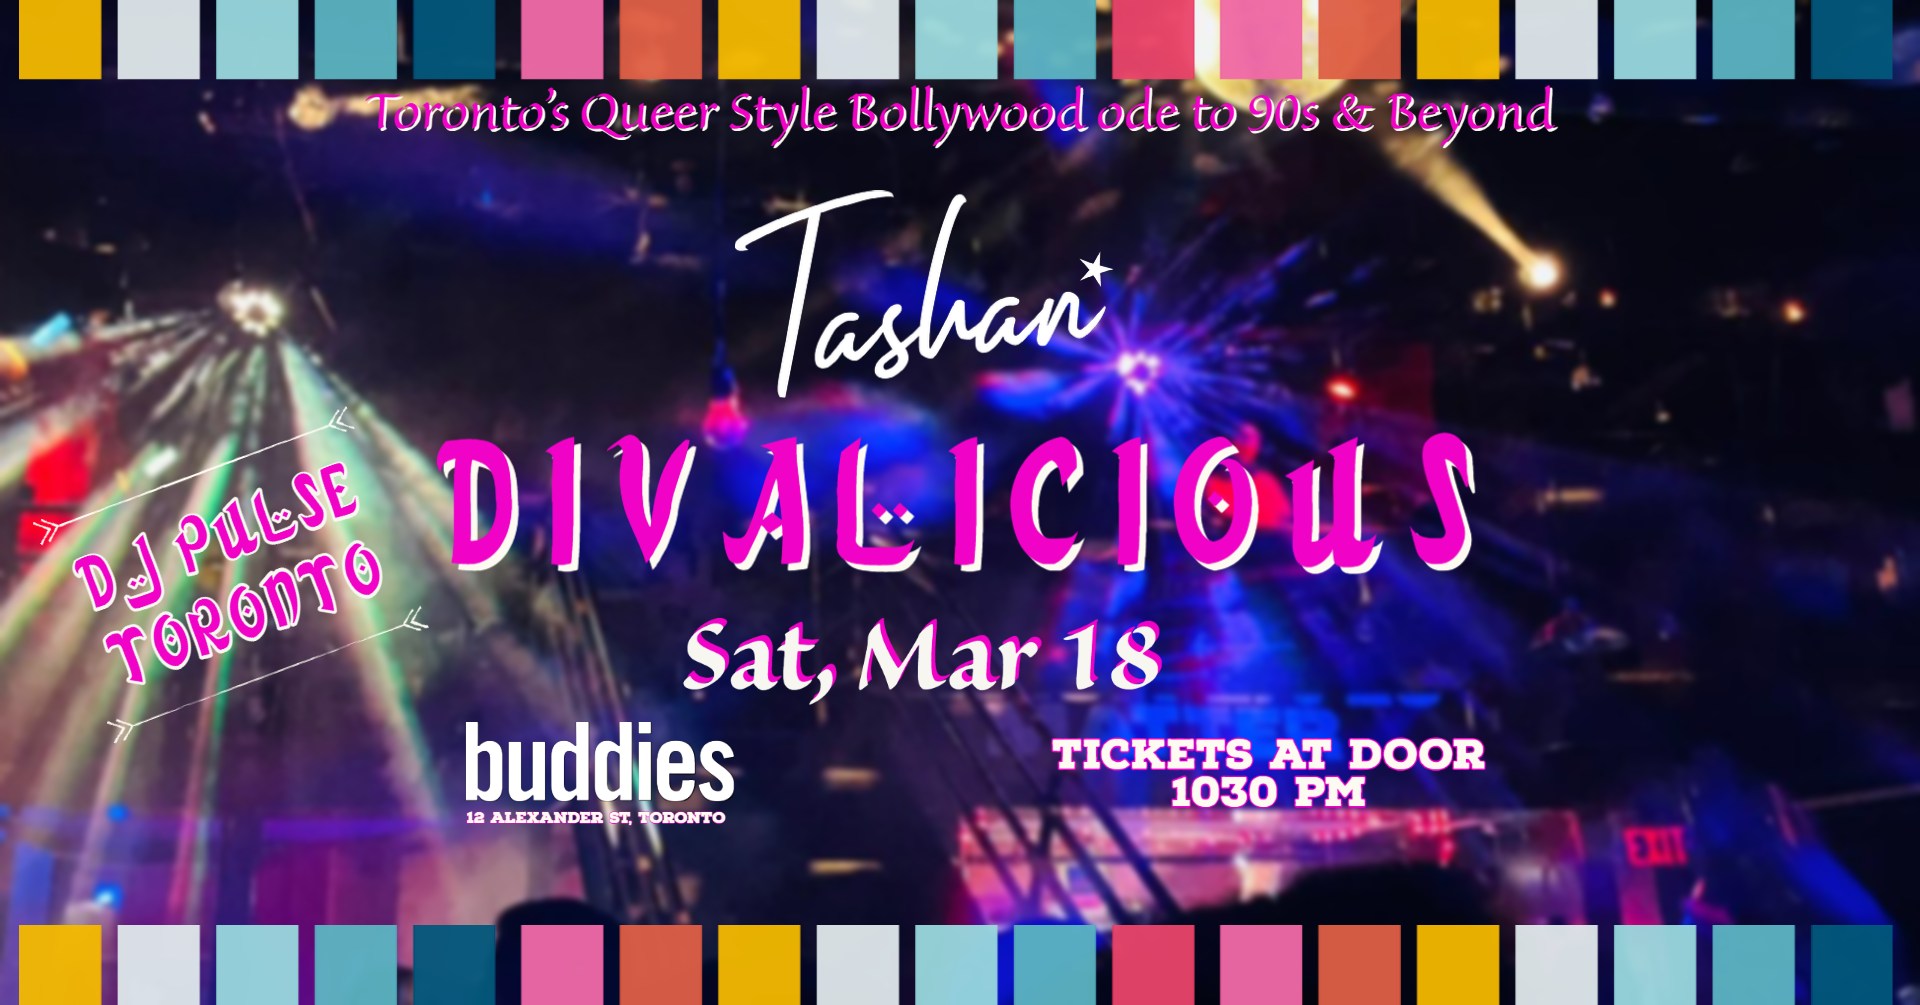 Promotional image for Tashan Divalicious. The image backdrop is the Buddies in Bad Times Cabaret event space lit up with cyc lights. Text reads: “Toronto’s Queer Style Bollywood ode to 90’s and beyond, Tashan Divalicious, DJ Pulse Toronto, Sat March 18, Buddies 12 Alexander Street, tickets at Door 10:30pm”